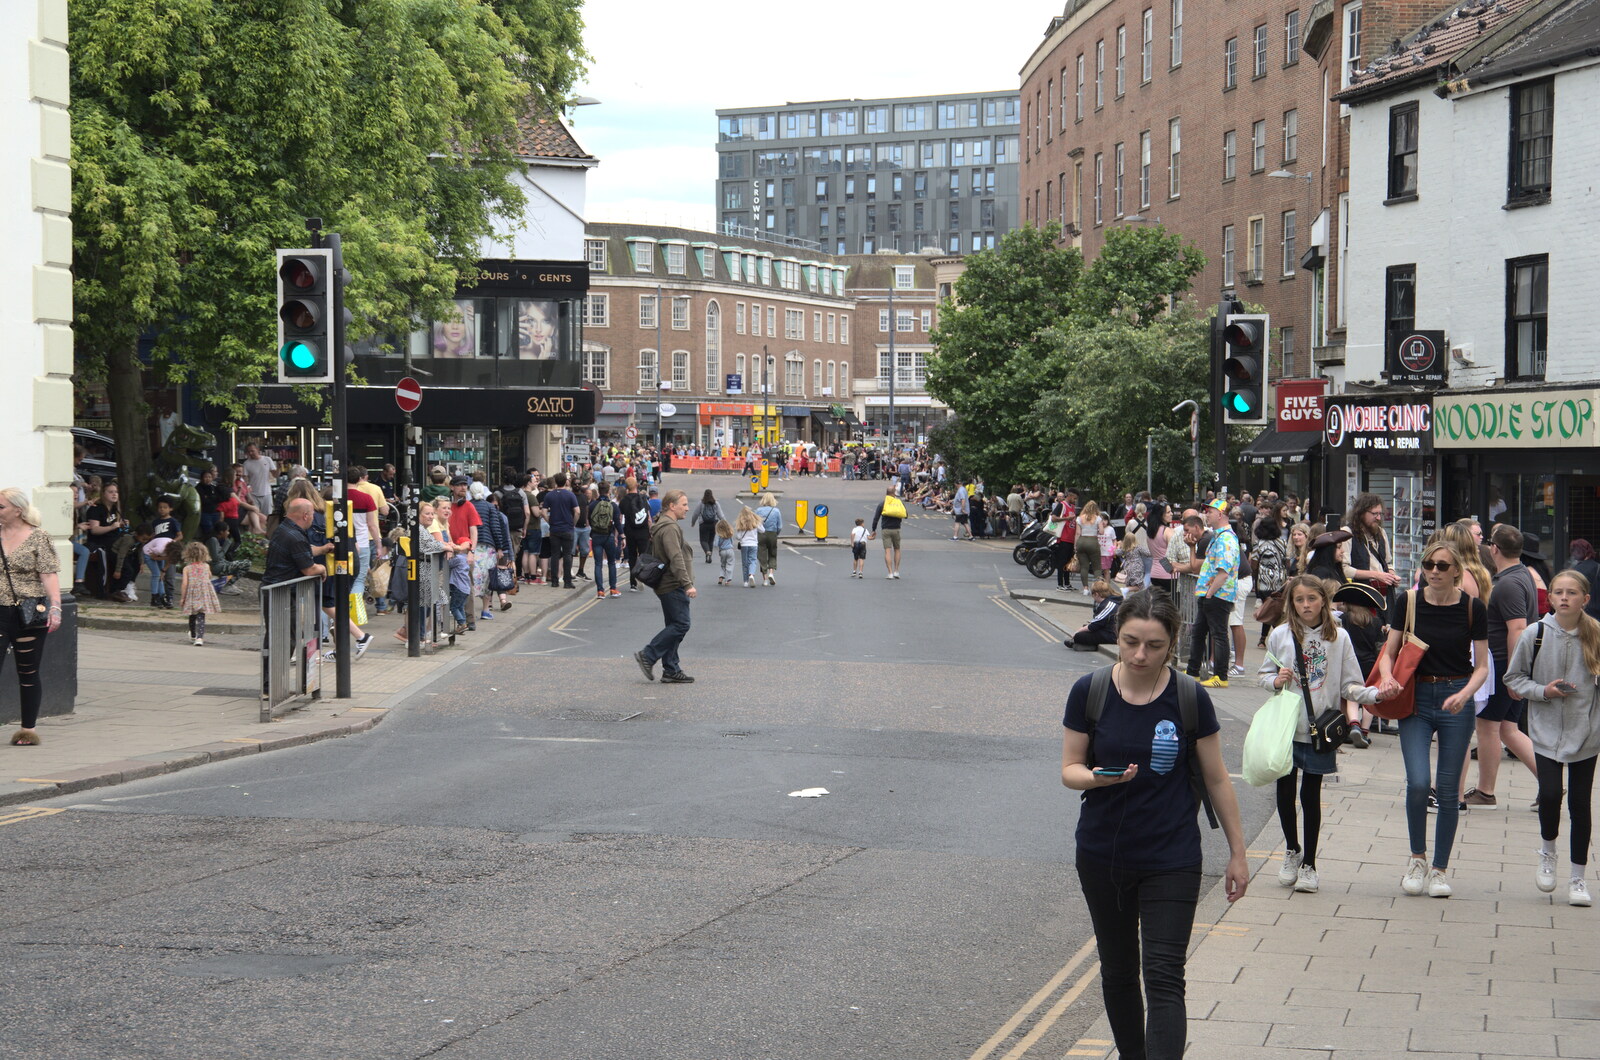 Crowds build on on Red Lion Street from The Lord Mayor's Procession, Norwich, Norfolk - 2nd July 2022